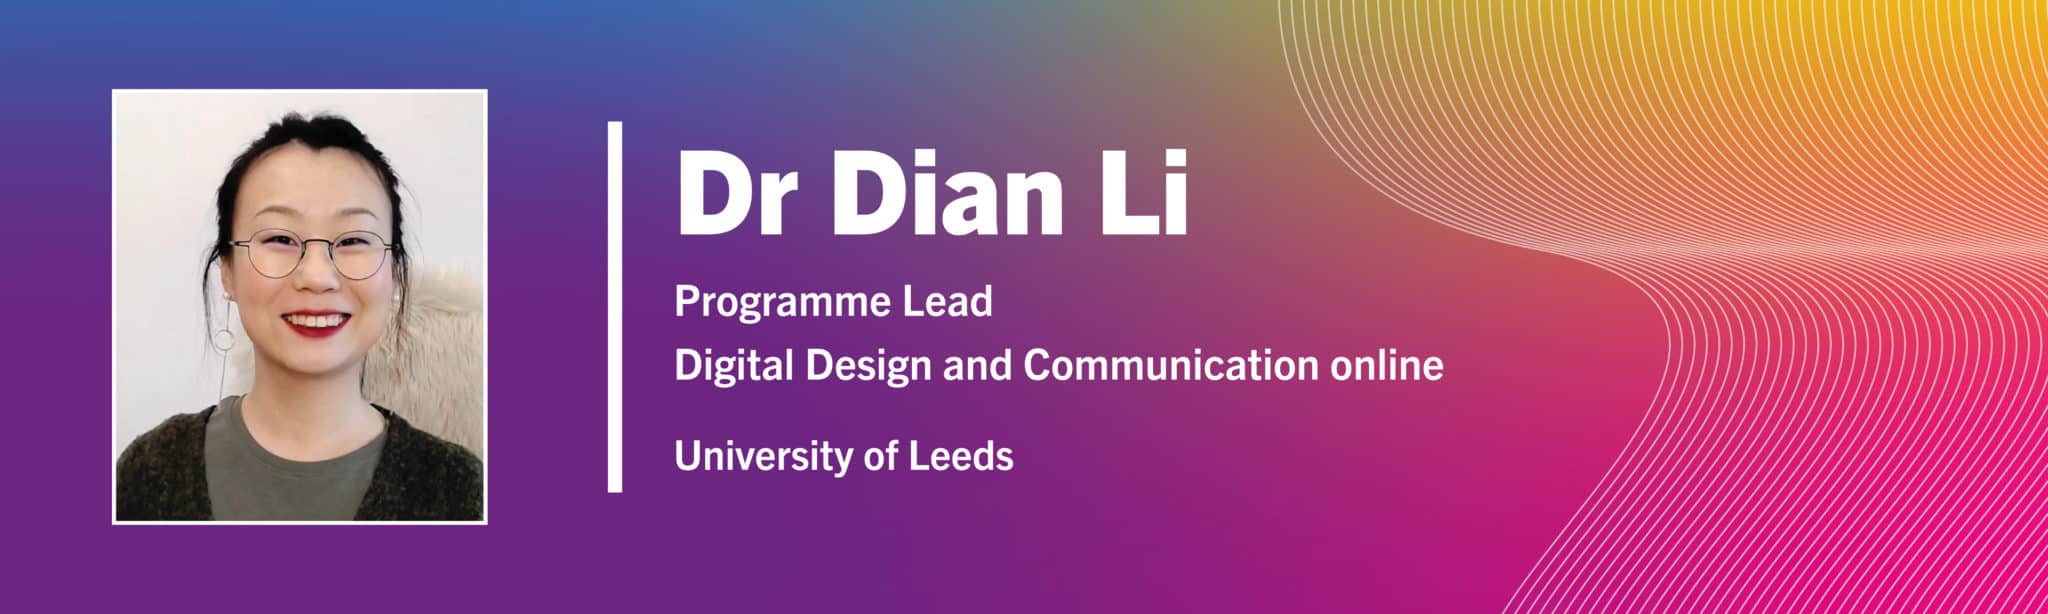 The image has a headshot of Dr Dian Li, the Programme Lead for the online Digital Design and Communication Course. The image is next to the white text, on a background with gradients of purple, pink, and orange.